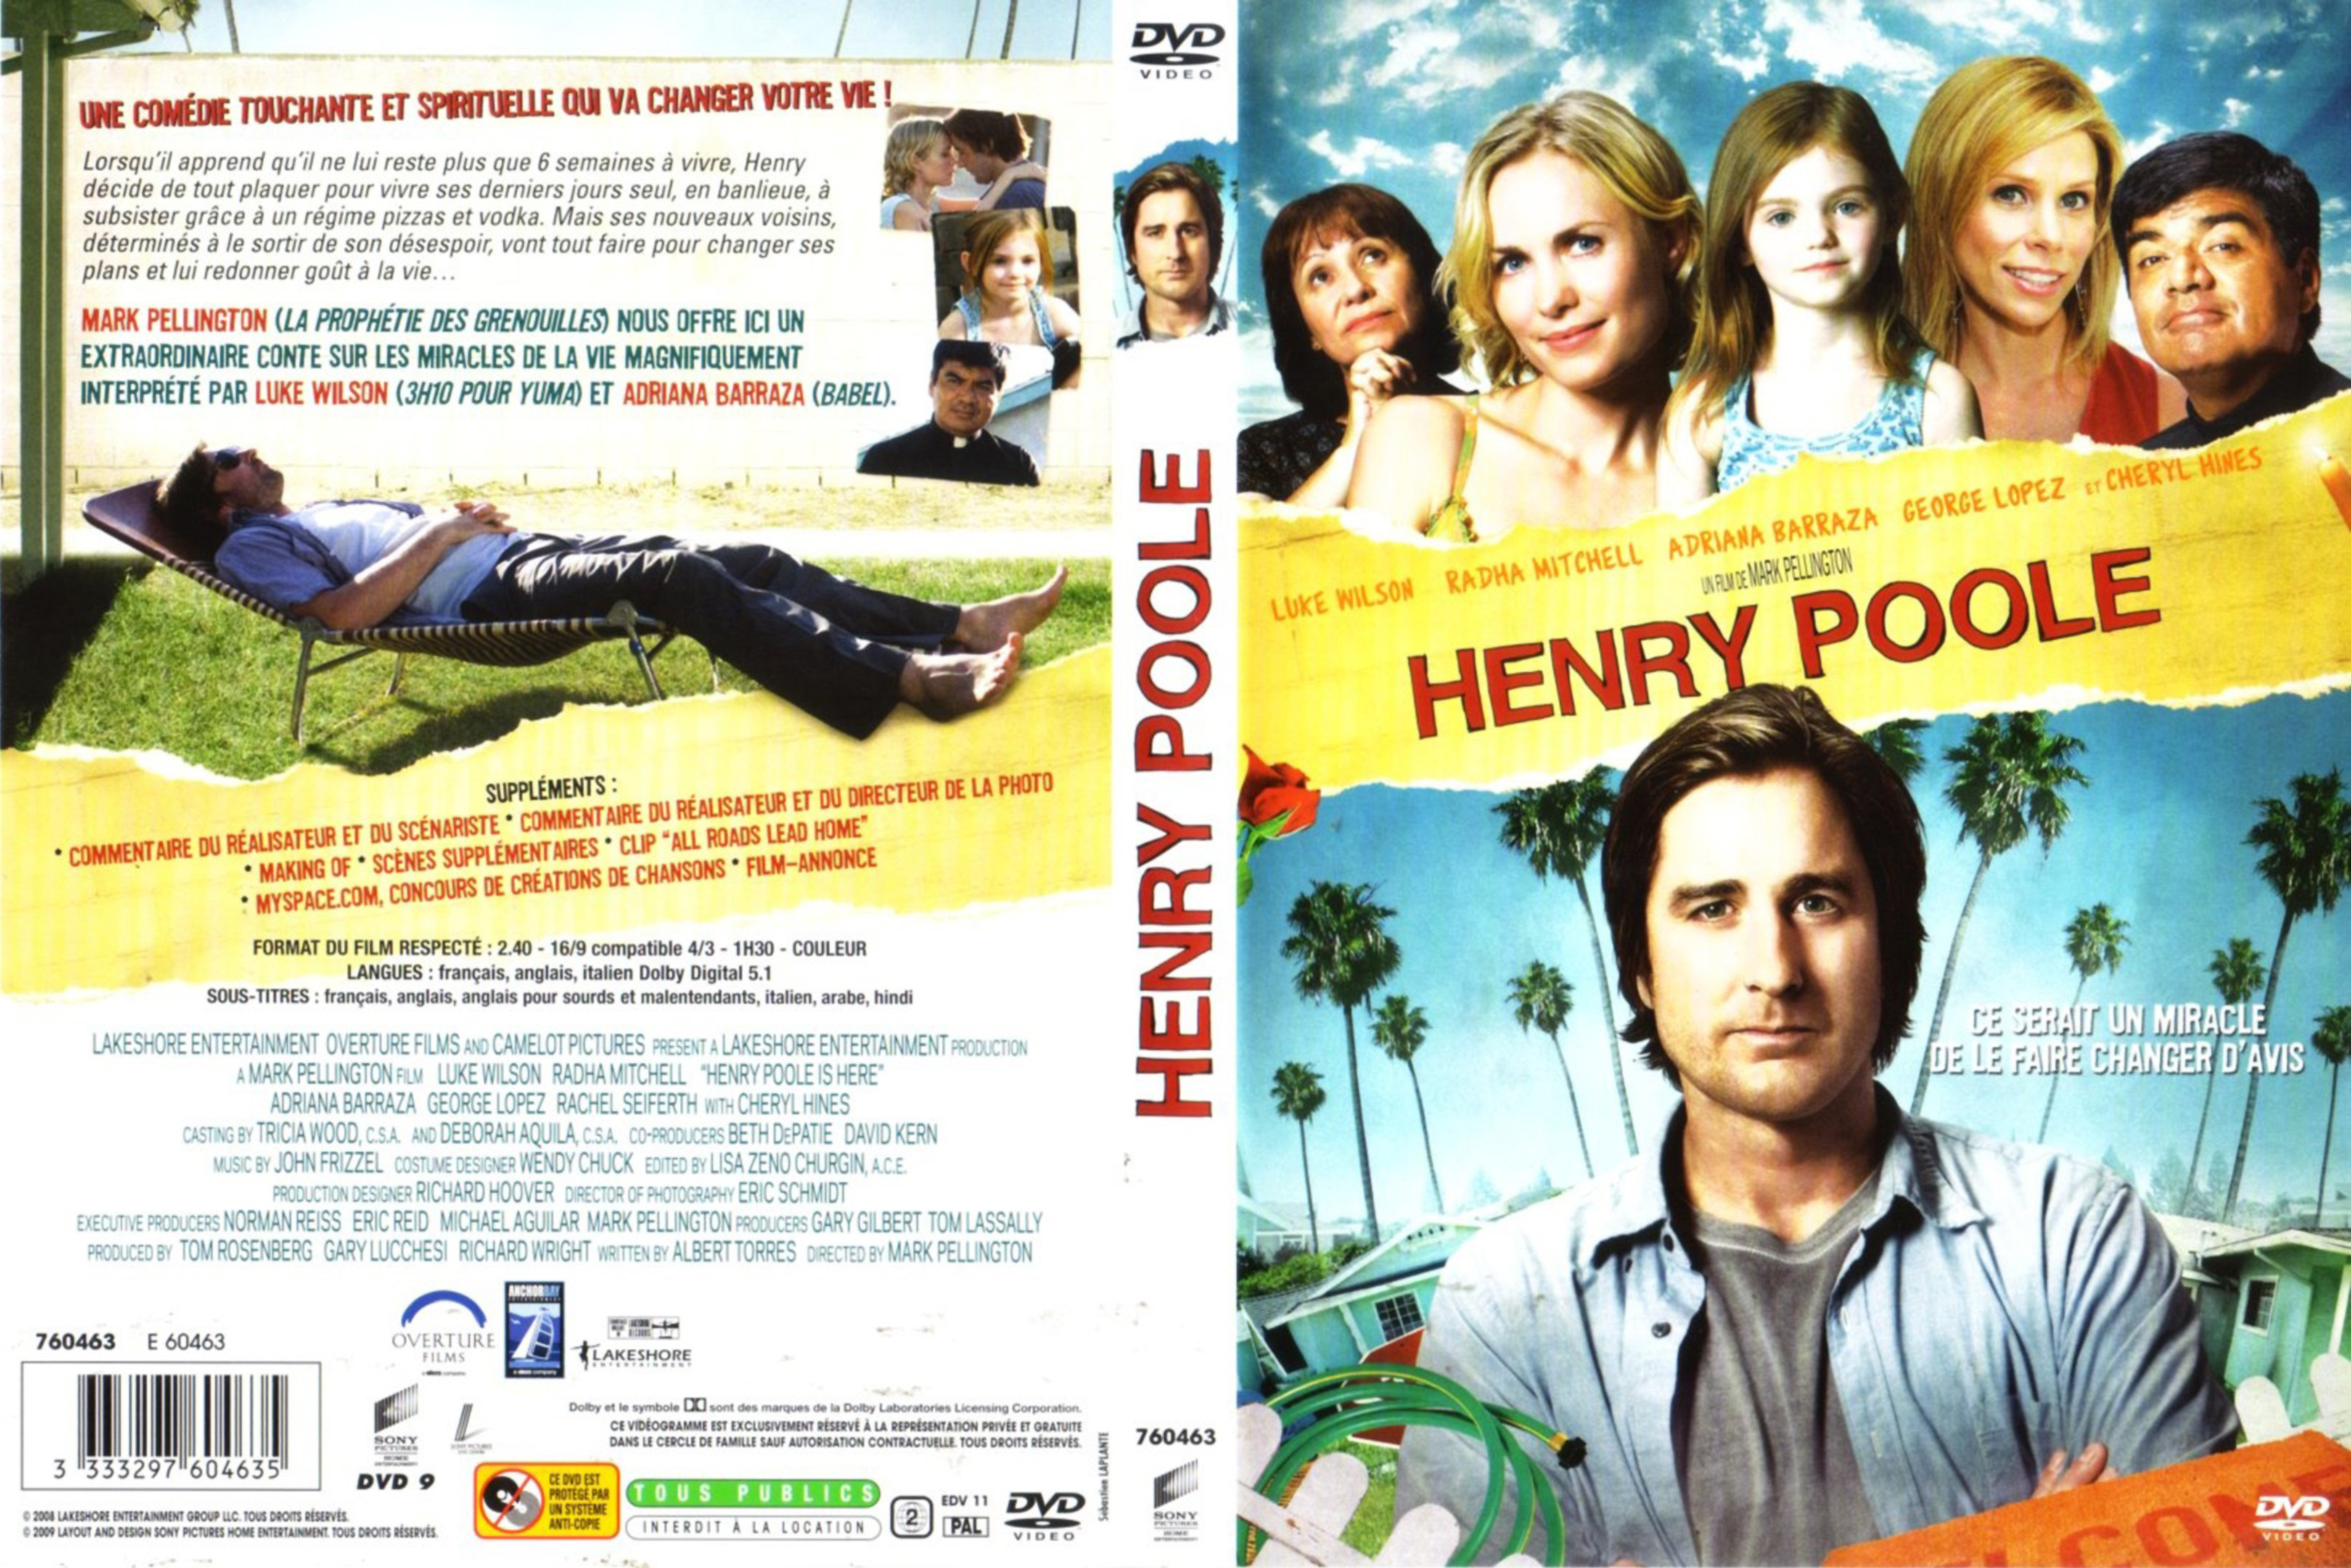 Jaquette DVD Henry Poole